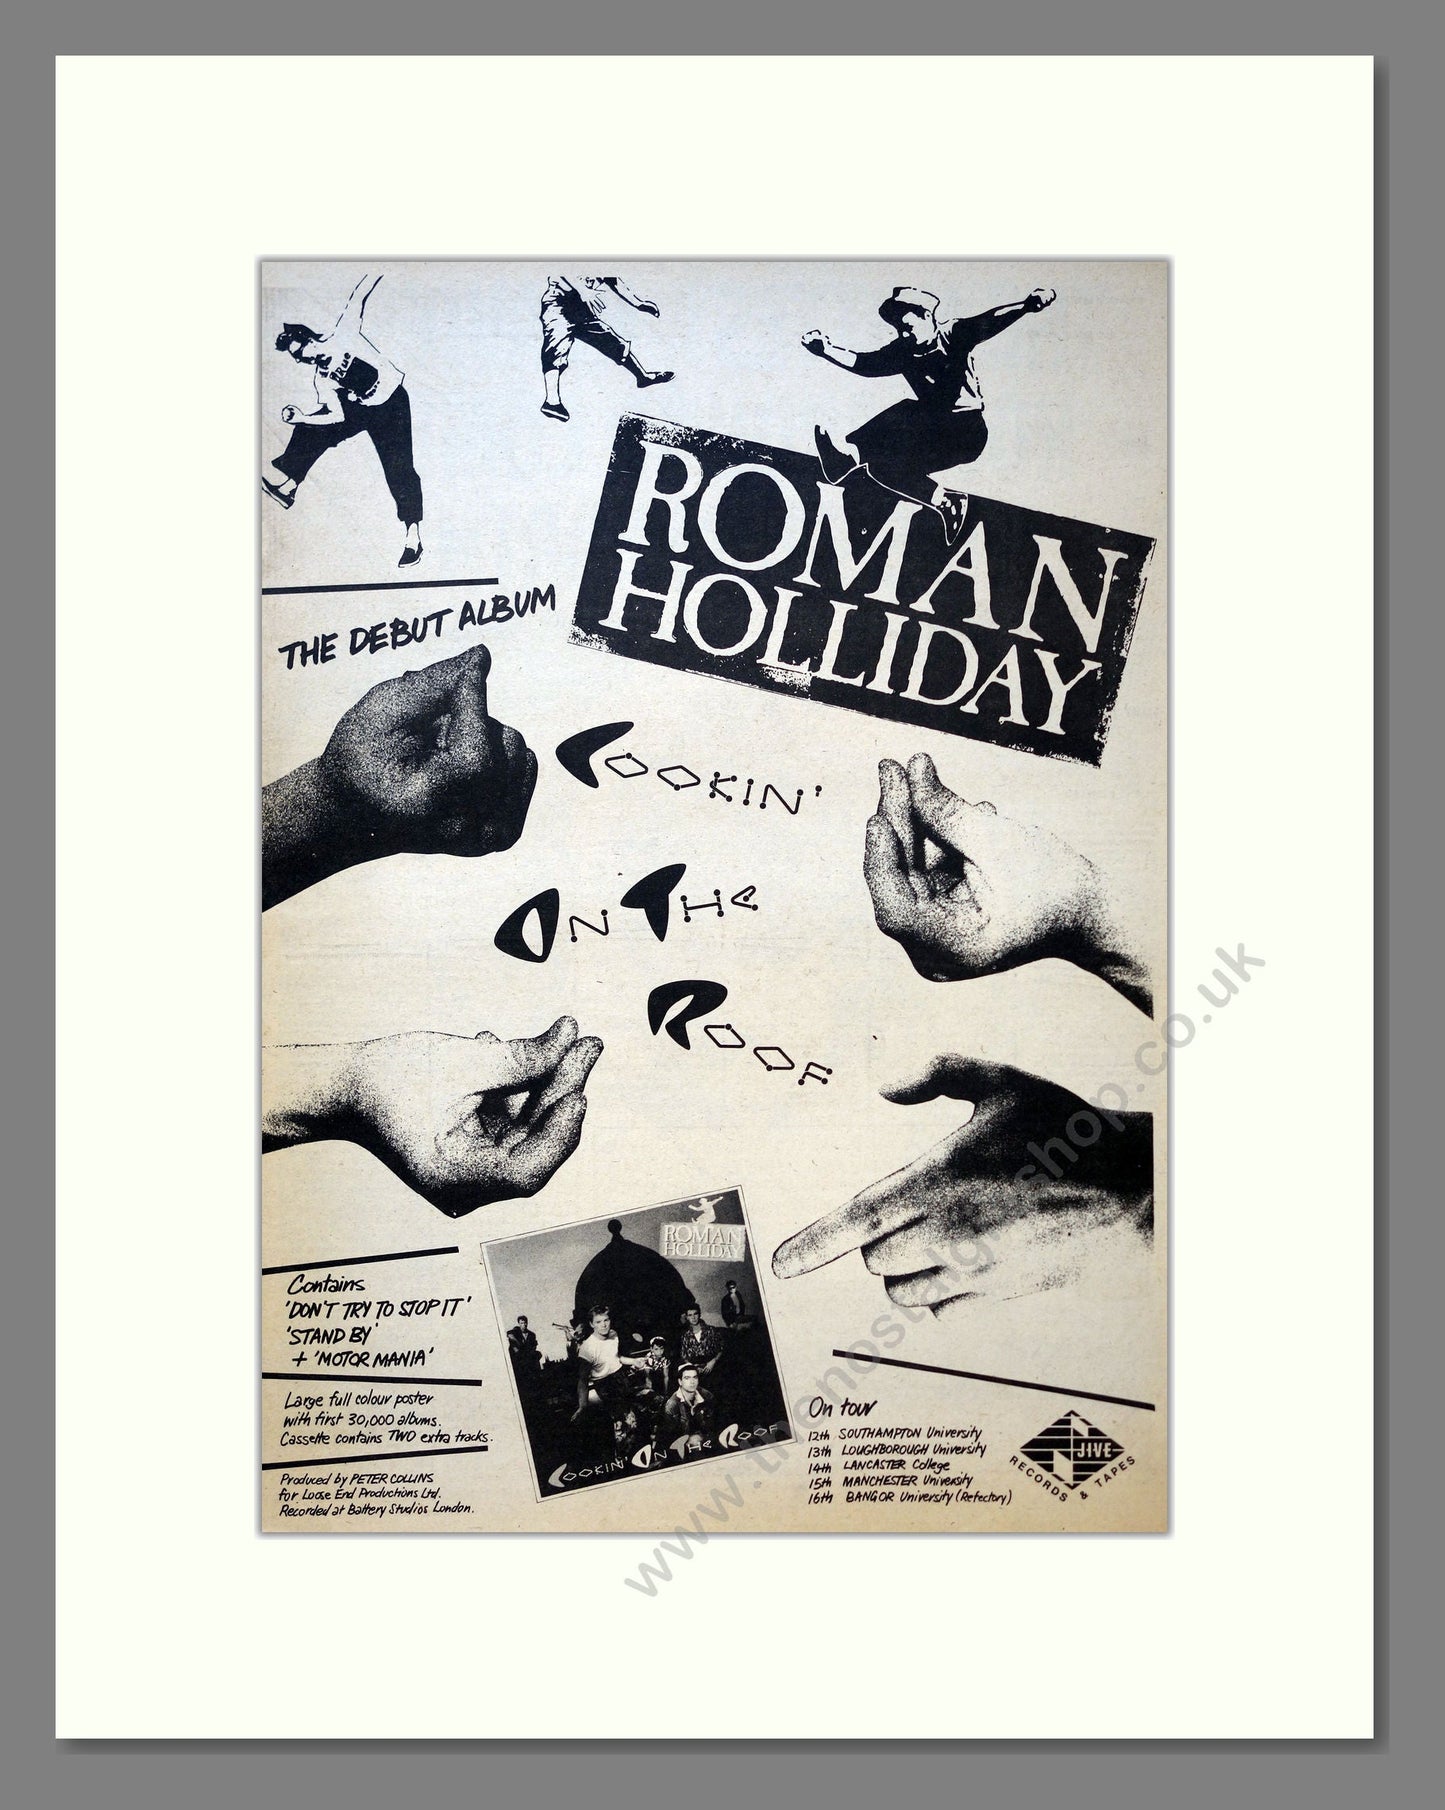 Roman Holiday - Cookin On The Roof. Vintage Advert 1983 (ref AD18195)